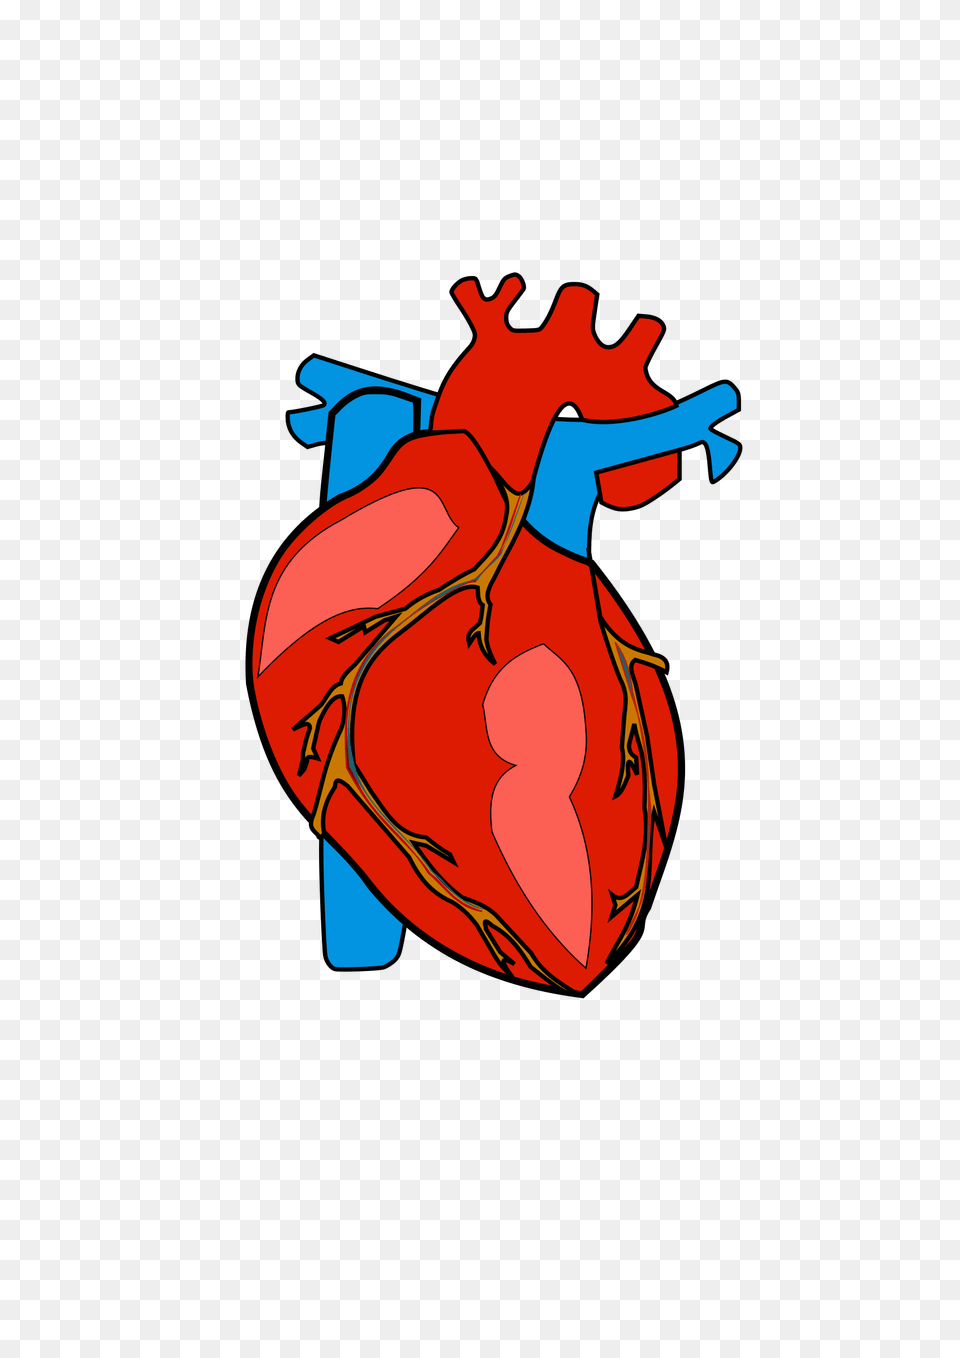 Human Heart Clipart Png Image